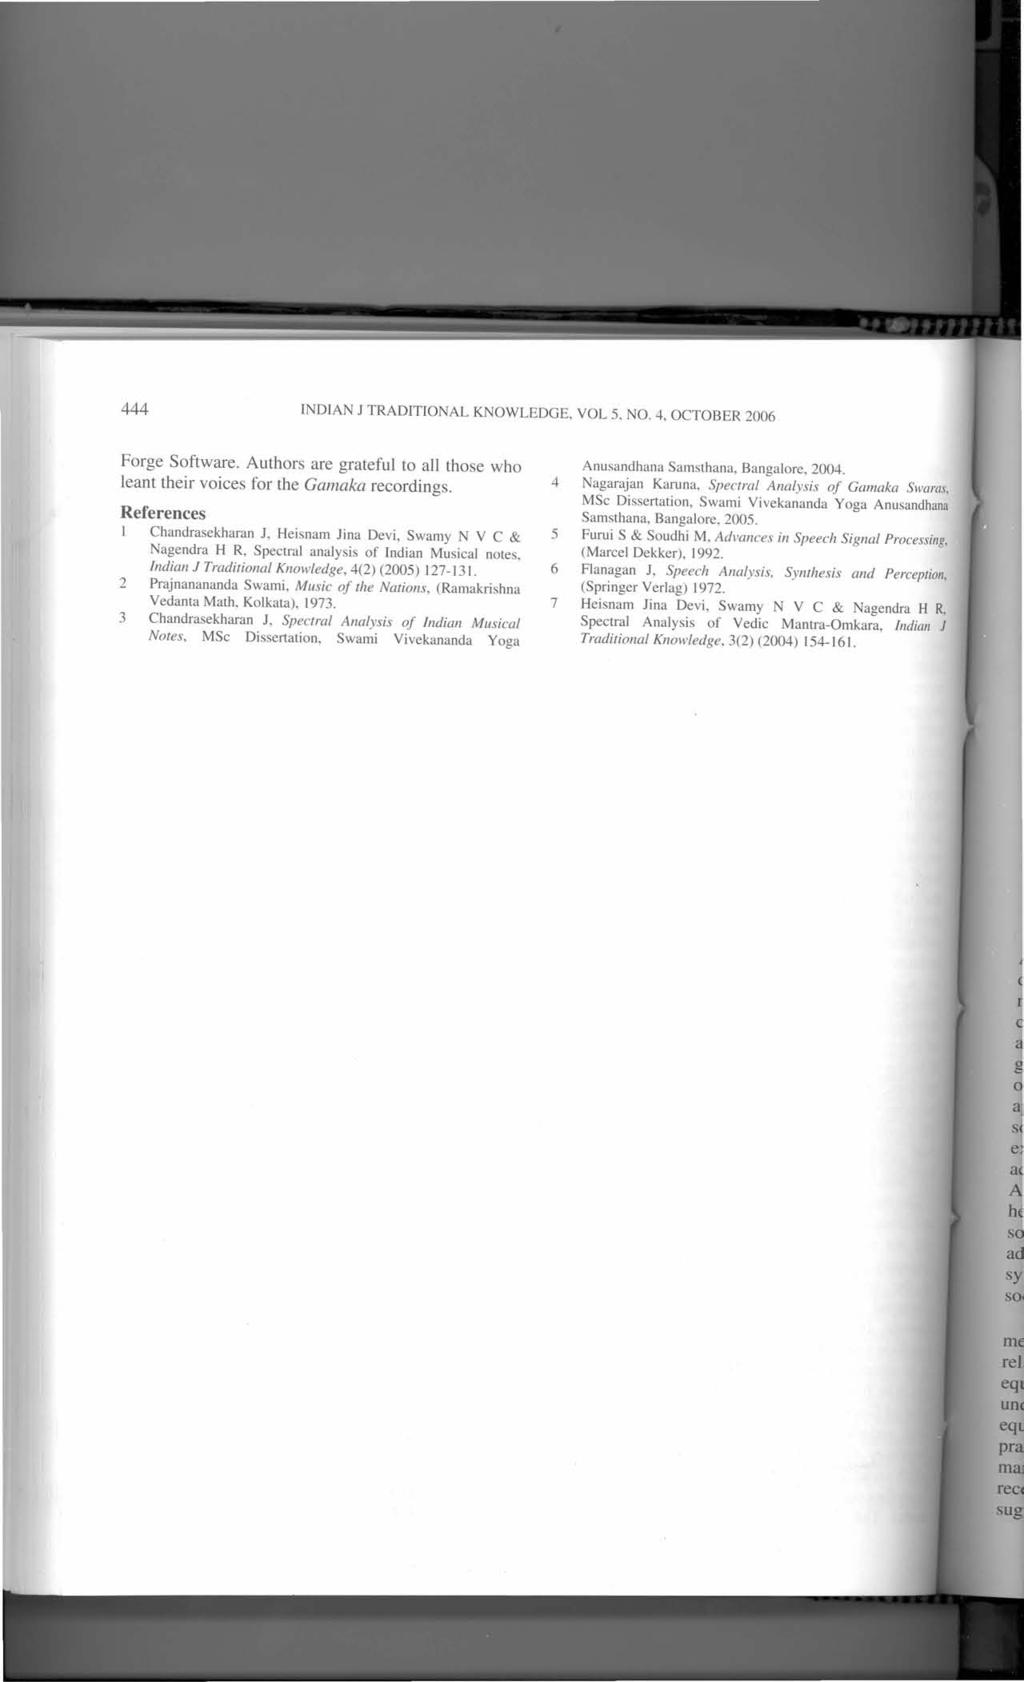 444 NDAN J TRADTONAL KNOWLEDGE, VOL 5, NO.4, OCTOBER 2006 Forge Software. Authors are grateful to all those who leant their voices for the Gamaka recordings.